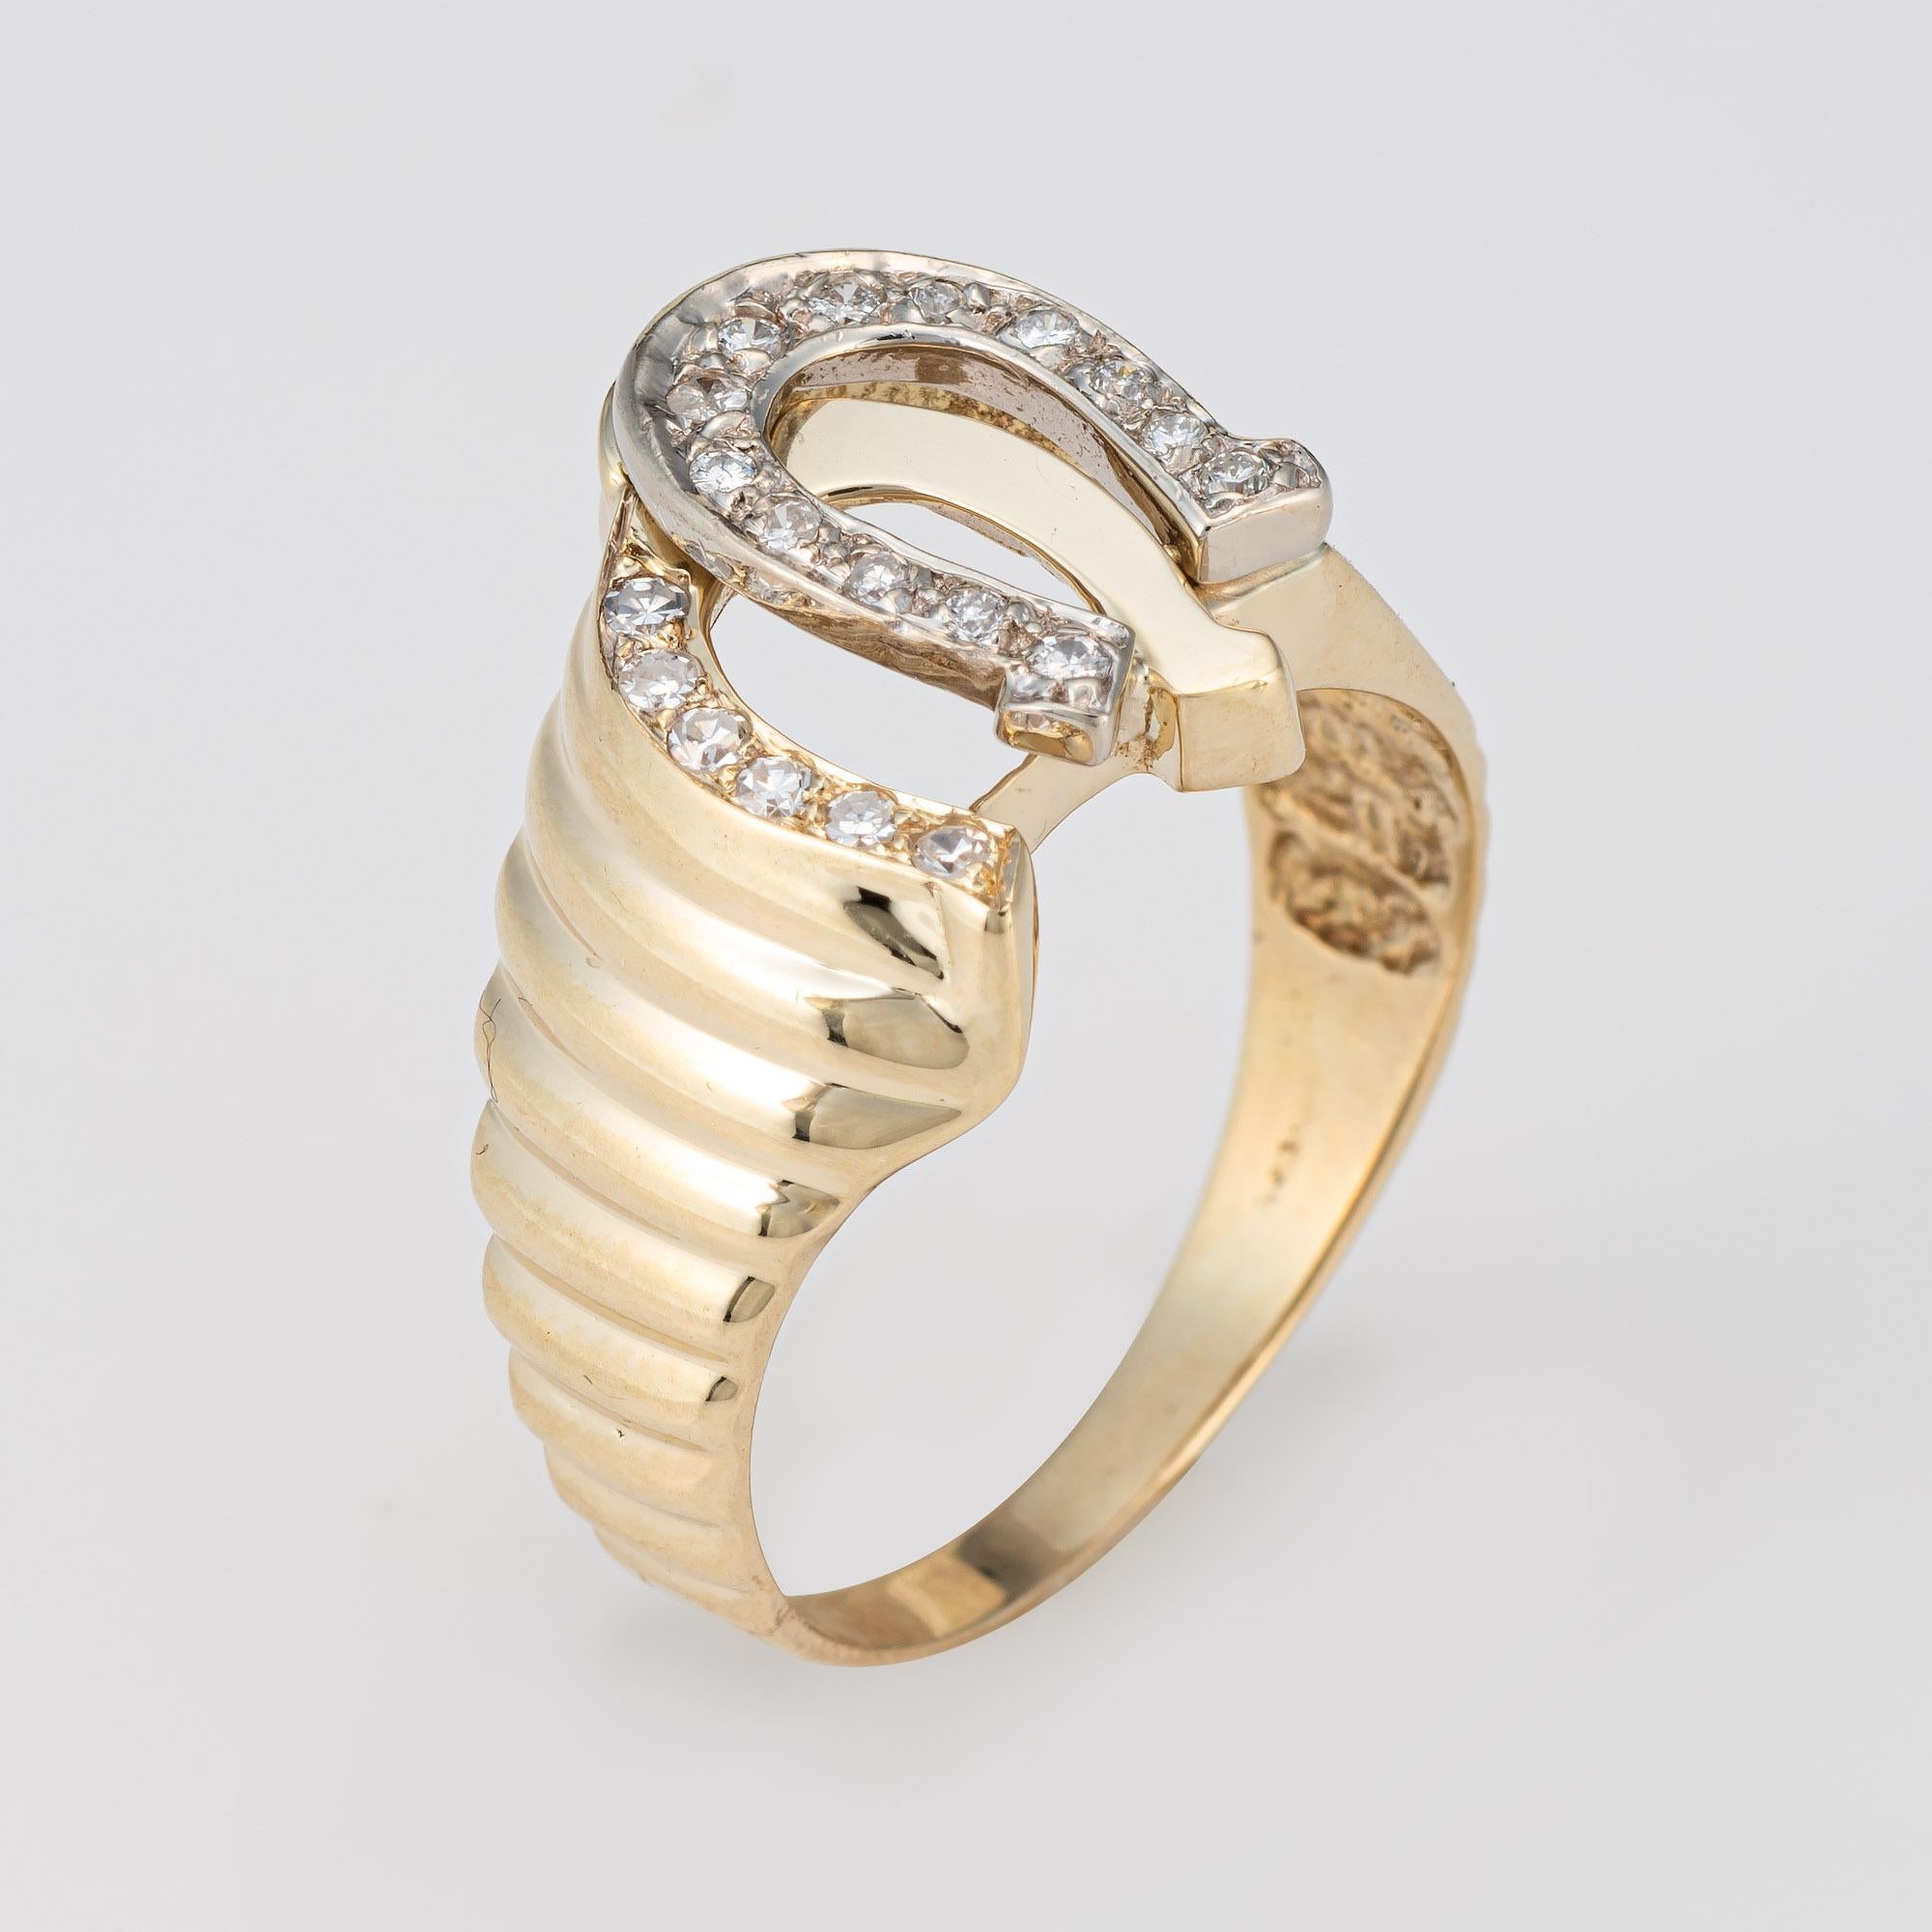 Stylish vintage double horseshoe ring crafted in 14 karat yellow gold (circa 1970s). 

19 diamonds total an estimated 0.10 carats (estimated at I-J color and SI2-I3 clarity).  

The double horseshoe design is double the luck and prosperity, for a